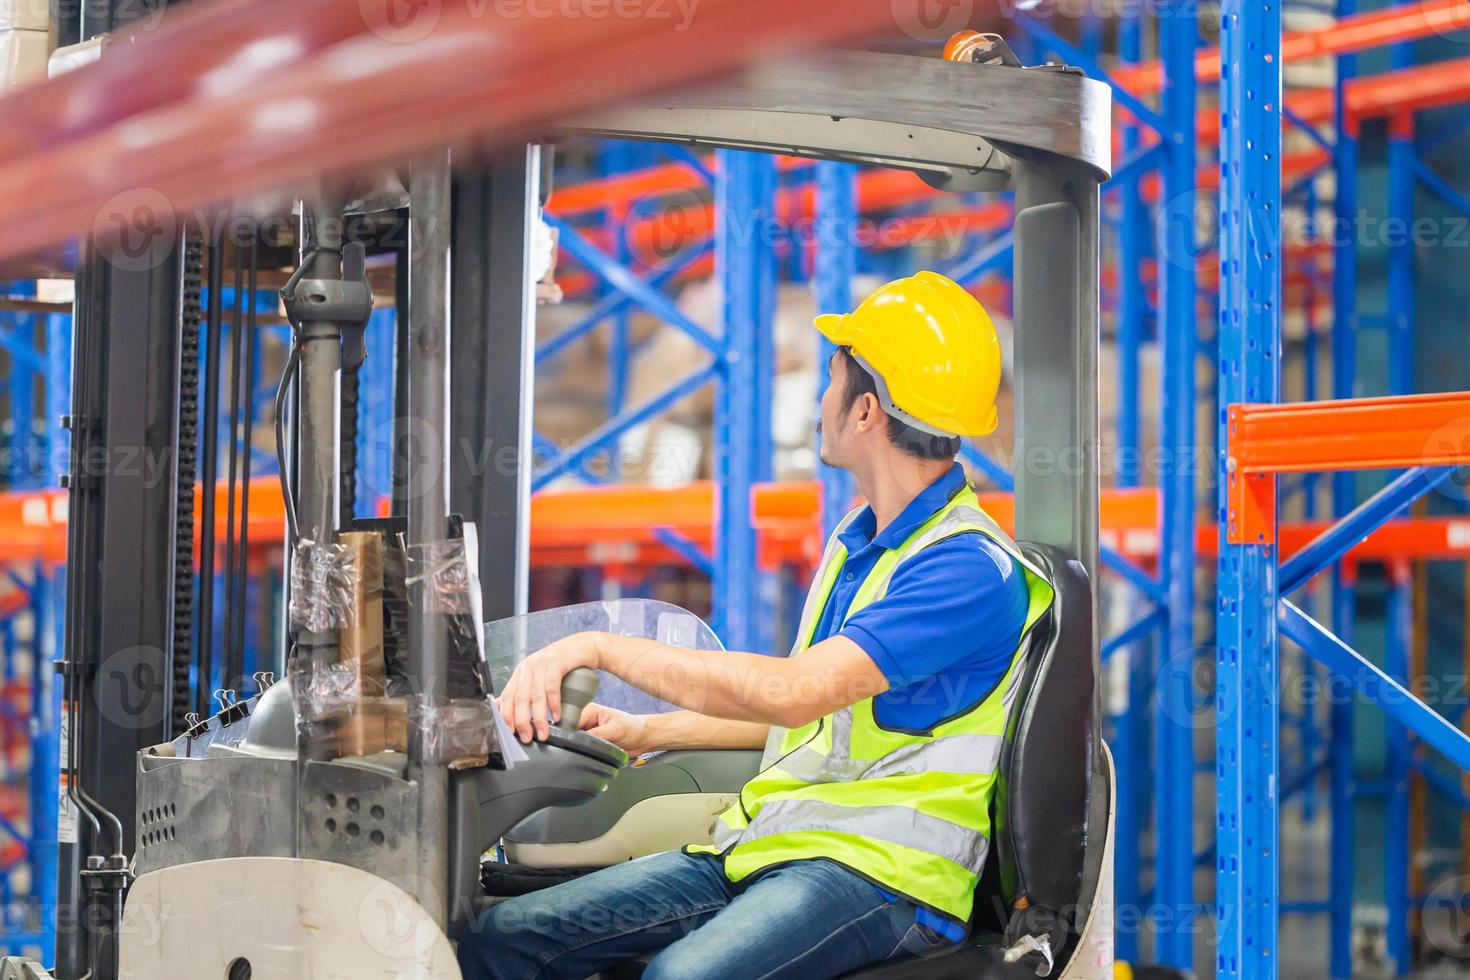 Worker on forklift, Manual workers working in warehouse, Worker driver at warehouse forklift loader works photo